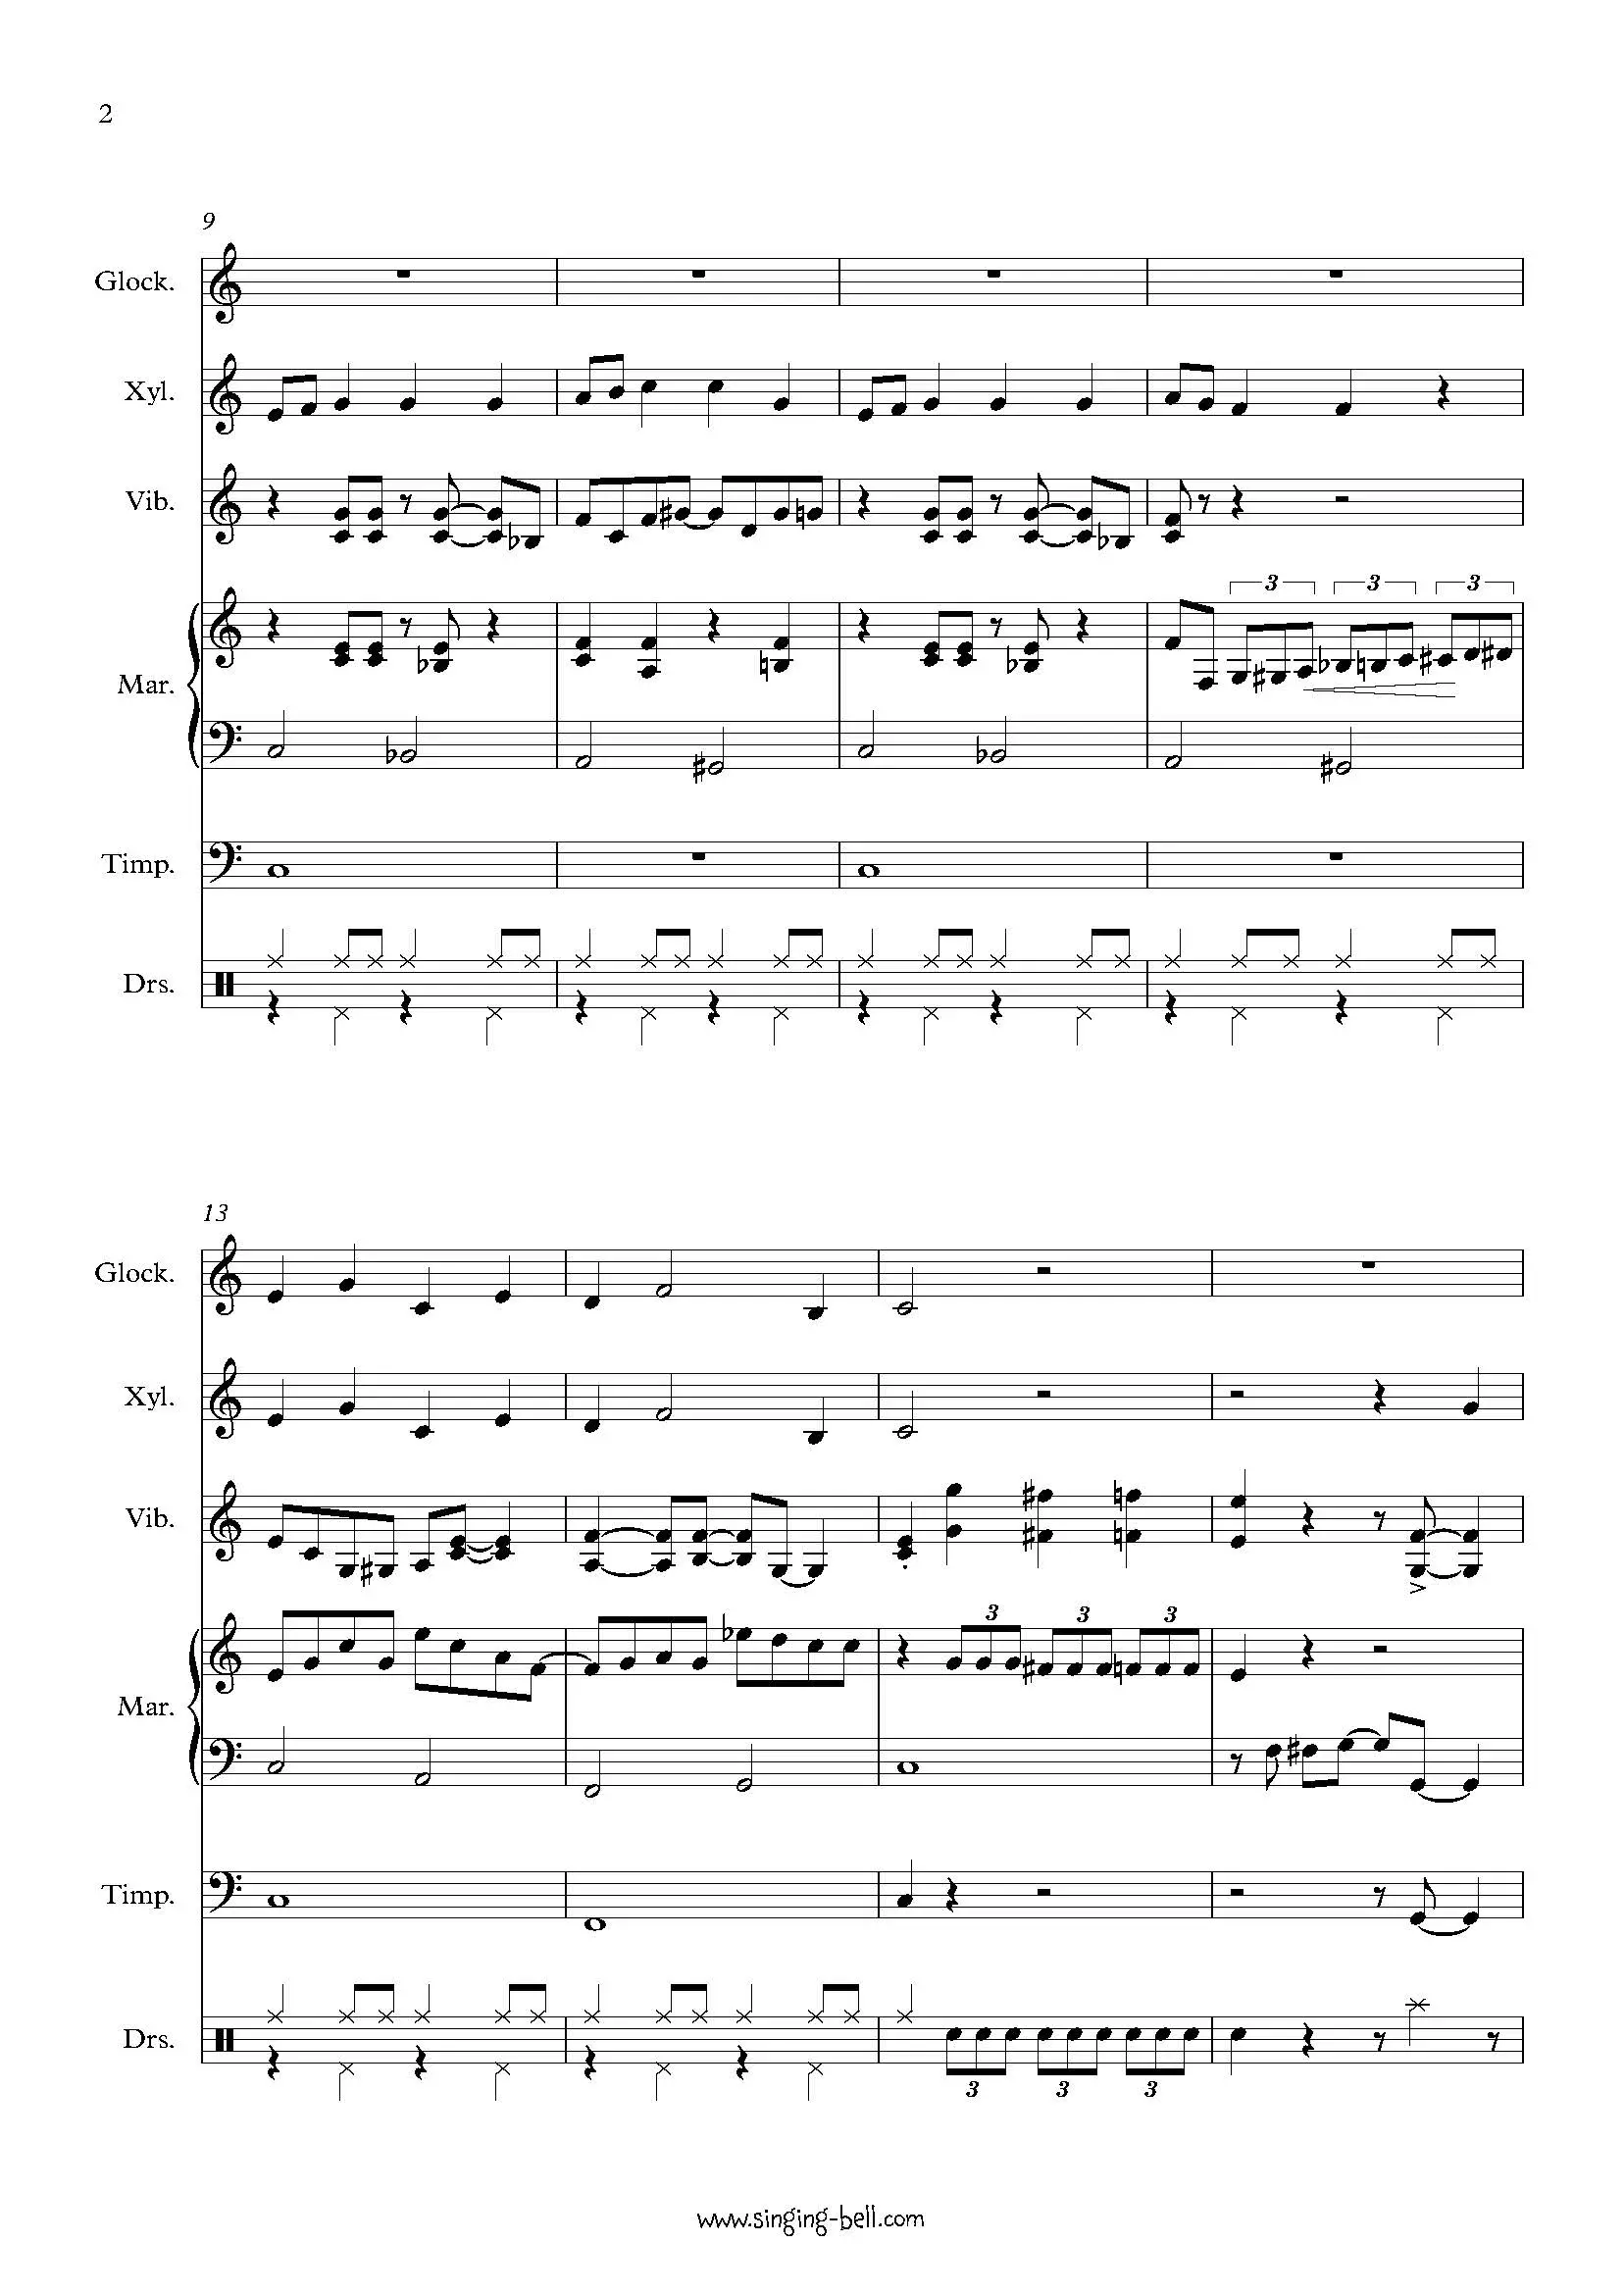 Santa Claus is Coming to Town - Percussion Sheet Music Page 2